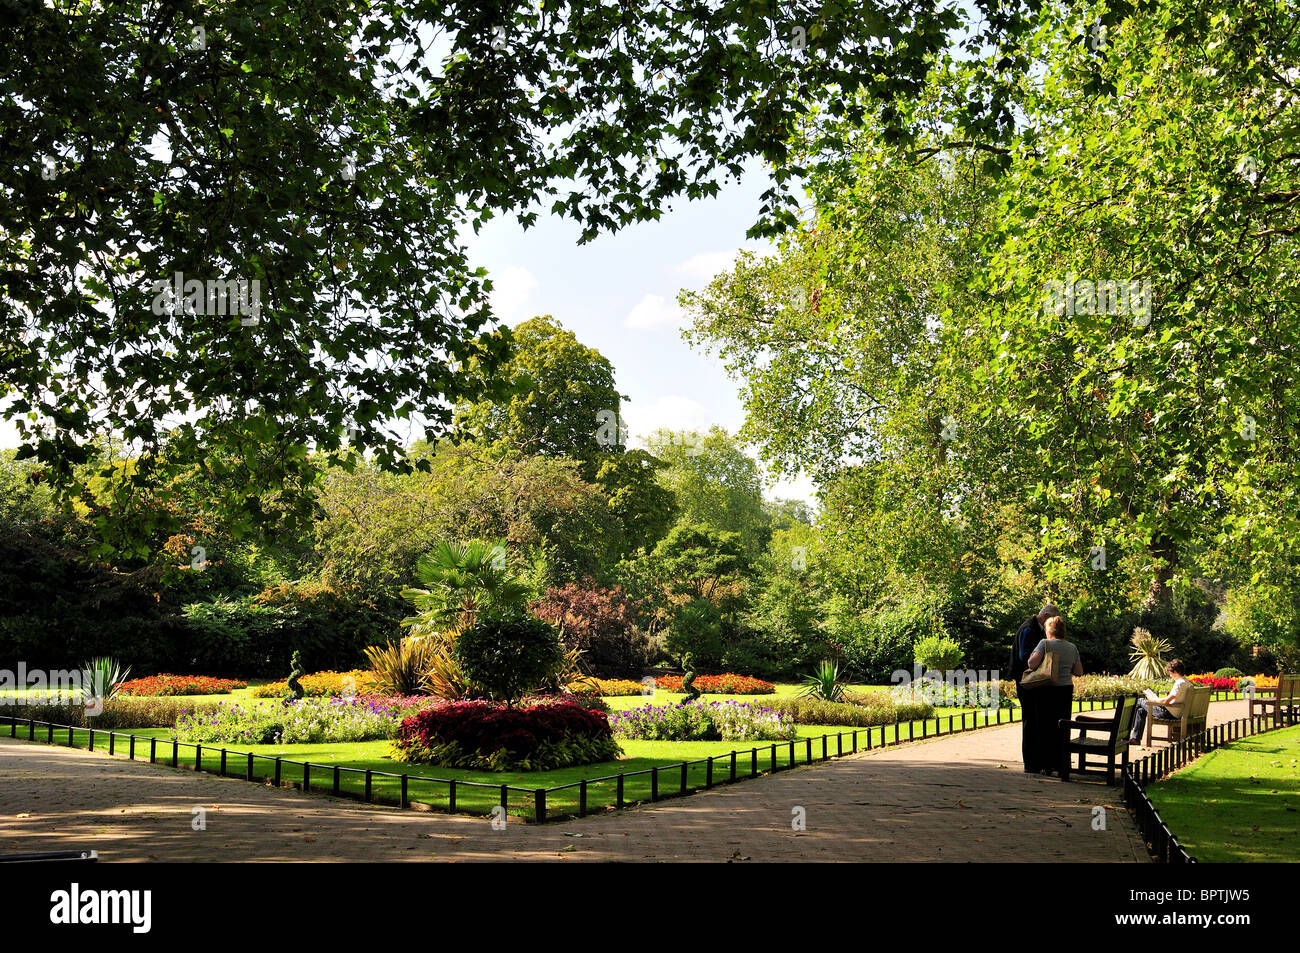 Queen's Park, London Borough of Brent, Greater London, Angleterre, Royaume-Uni Banque D'Images